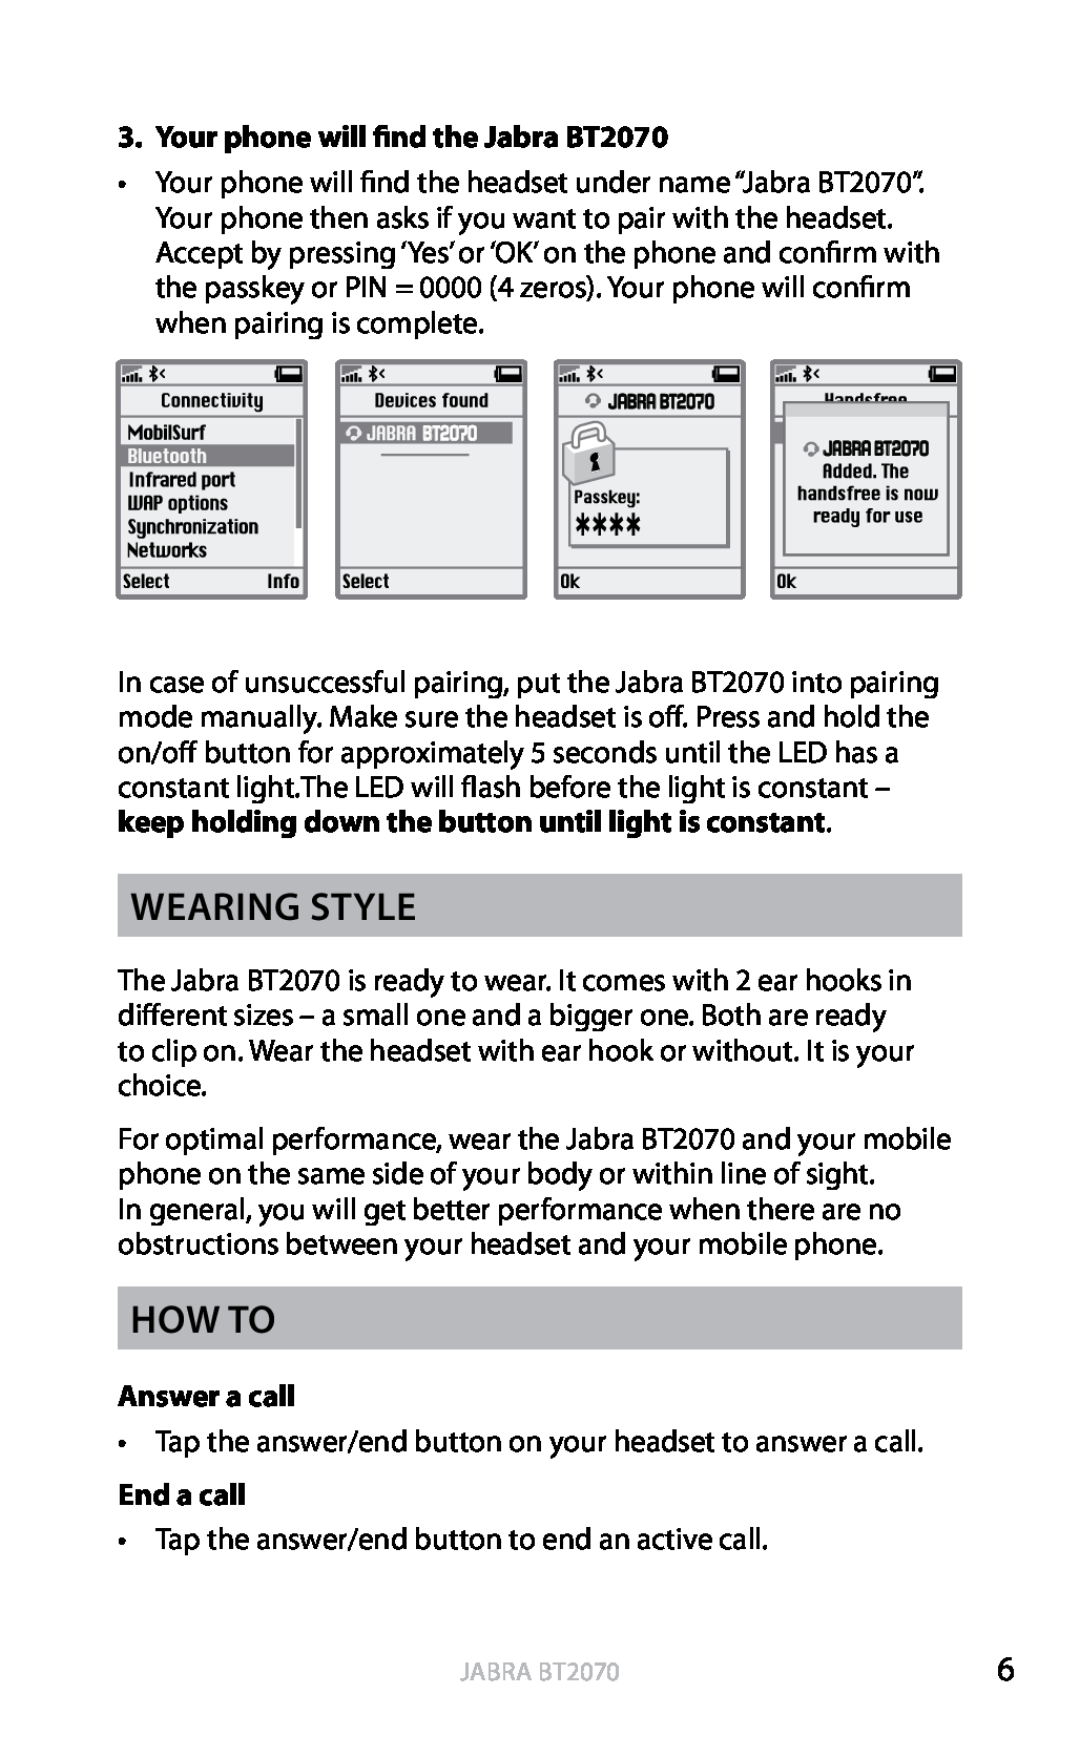 Jabra user manual Wearing style, How to, Your phone will find the Jabra BT2070, Answer a call, End a call, english 